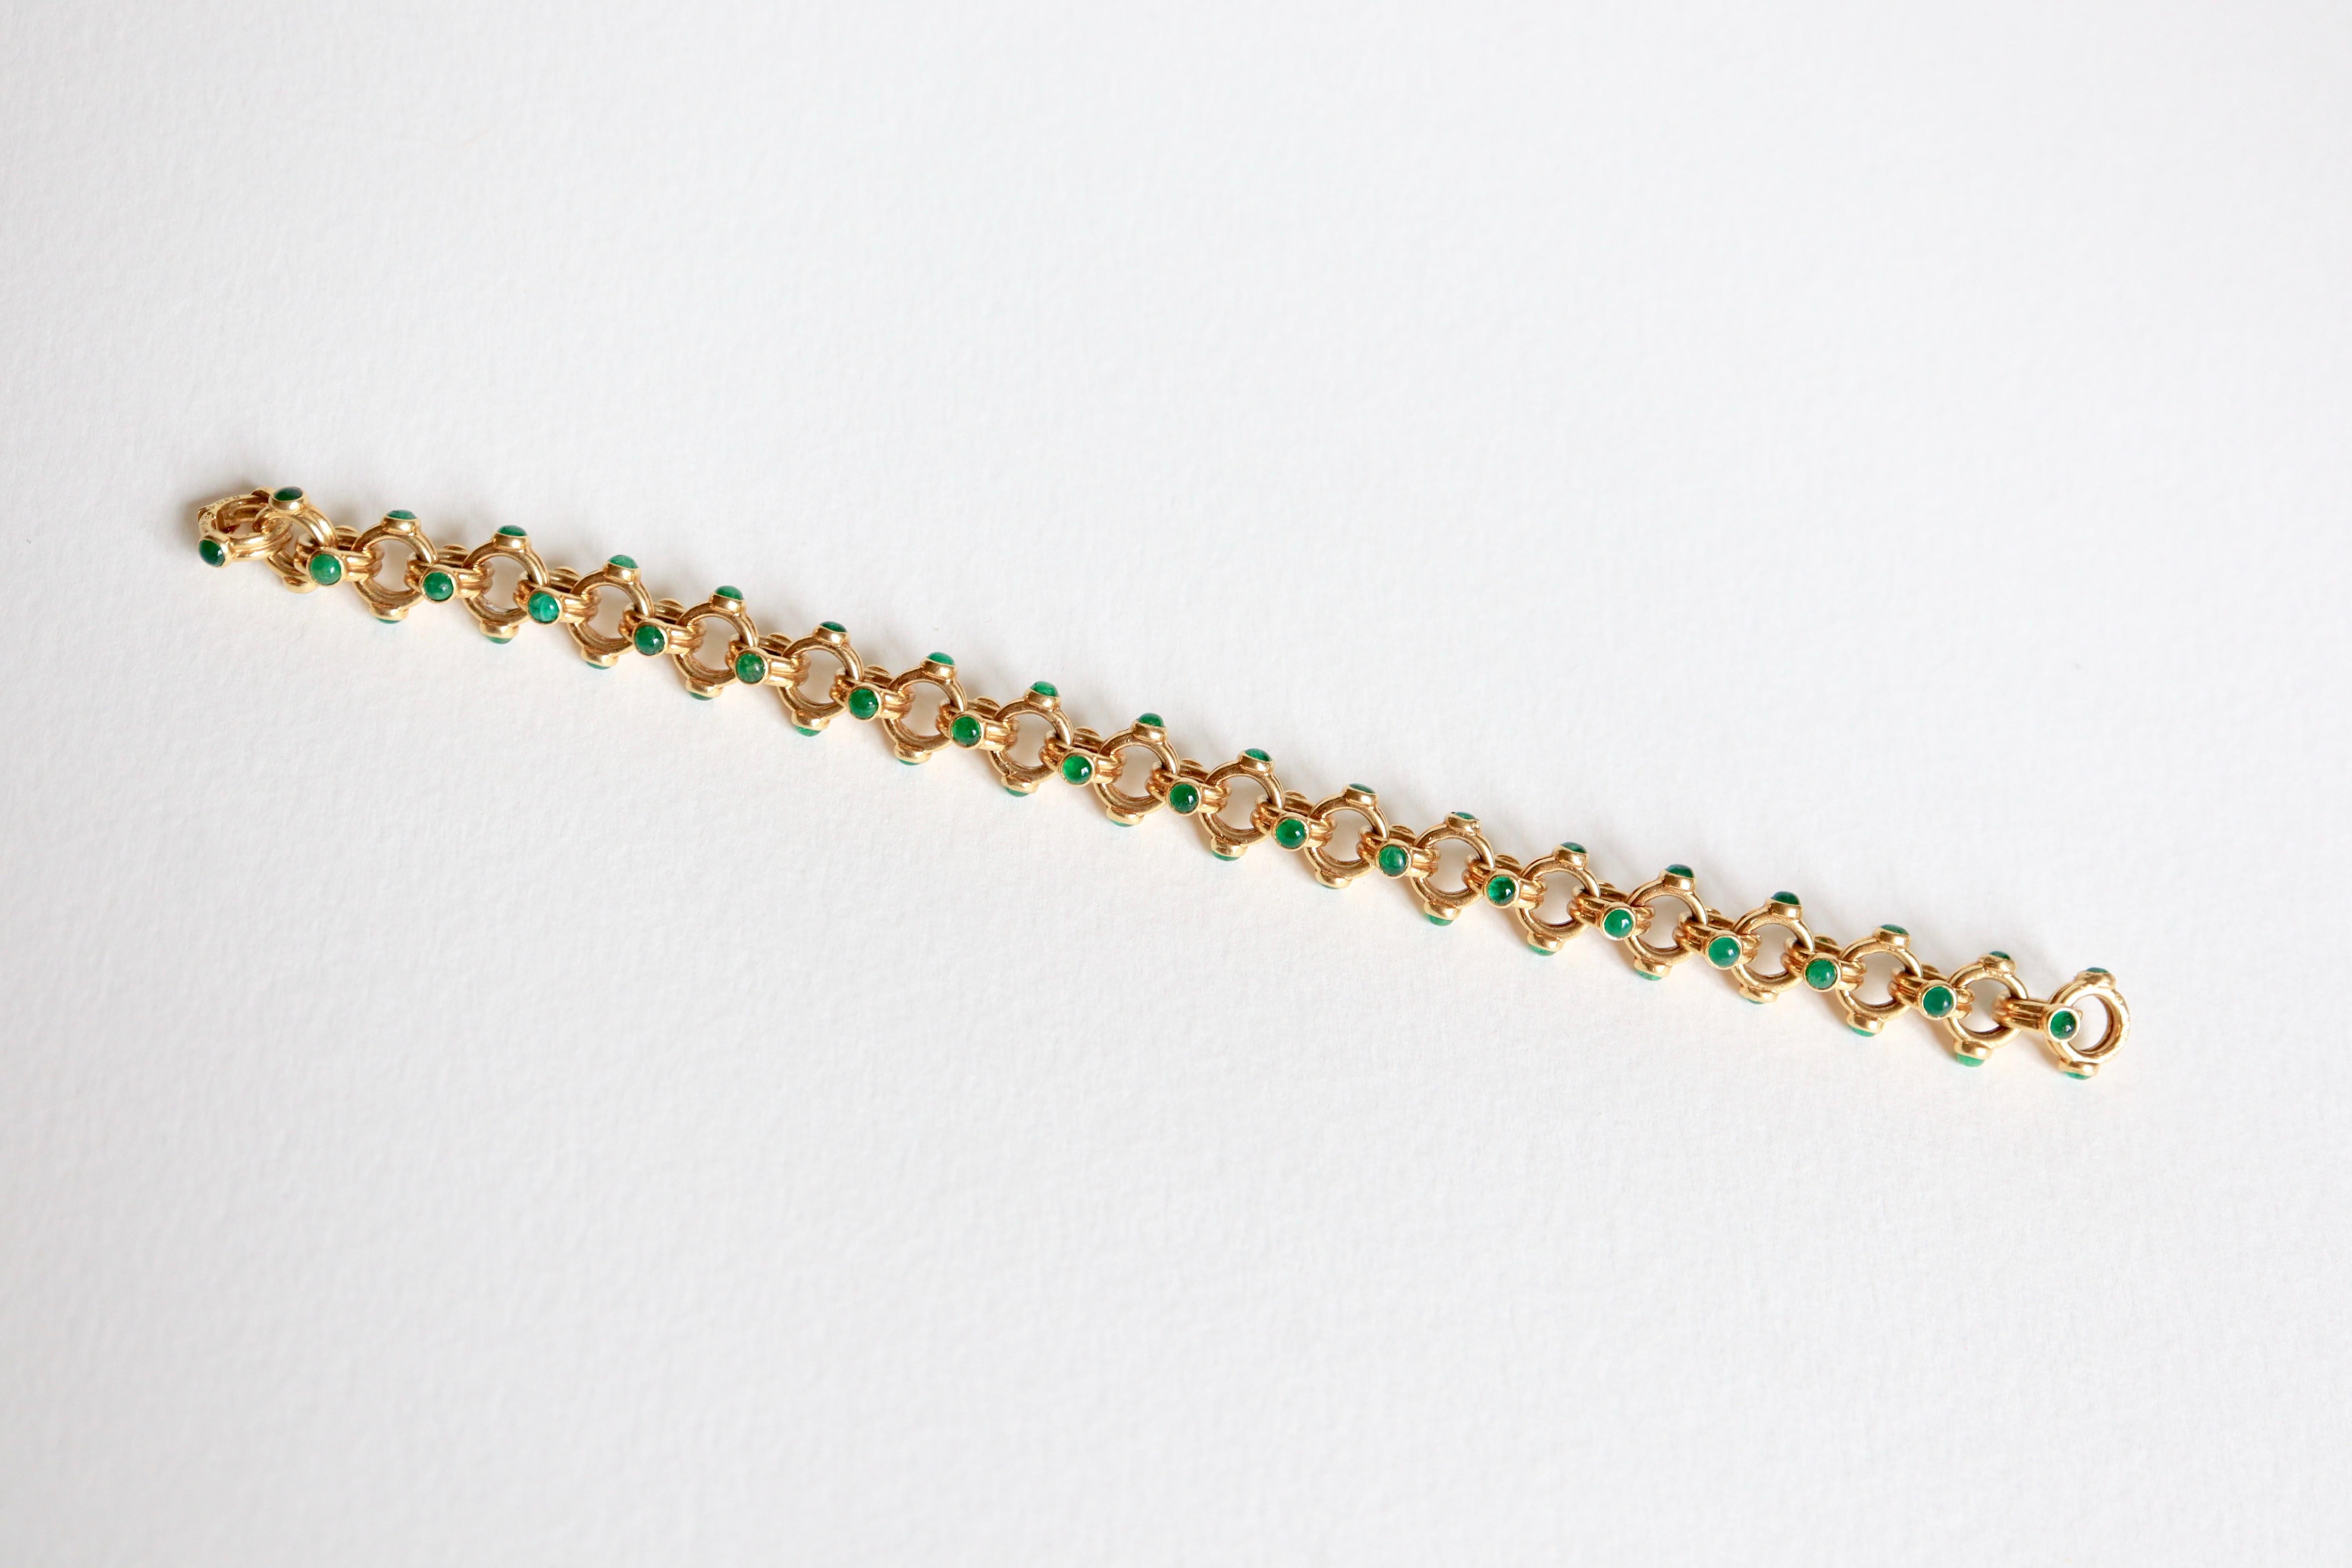 VERNEY POIRAY Bracelet in 18 Carat yellow Gold and Emeralds 1970's
18 kt yellow Gold Bracelet 36 entwined Rings Crimping two Cabochon Emeralds each.
Signed and numbered: POIRAY 830484 and VERNEY
Width: 1 cm Length: 19 cm Gross weight: 51 g